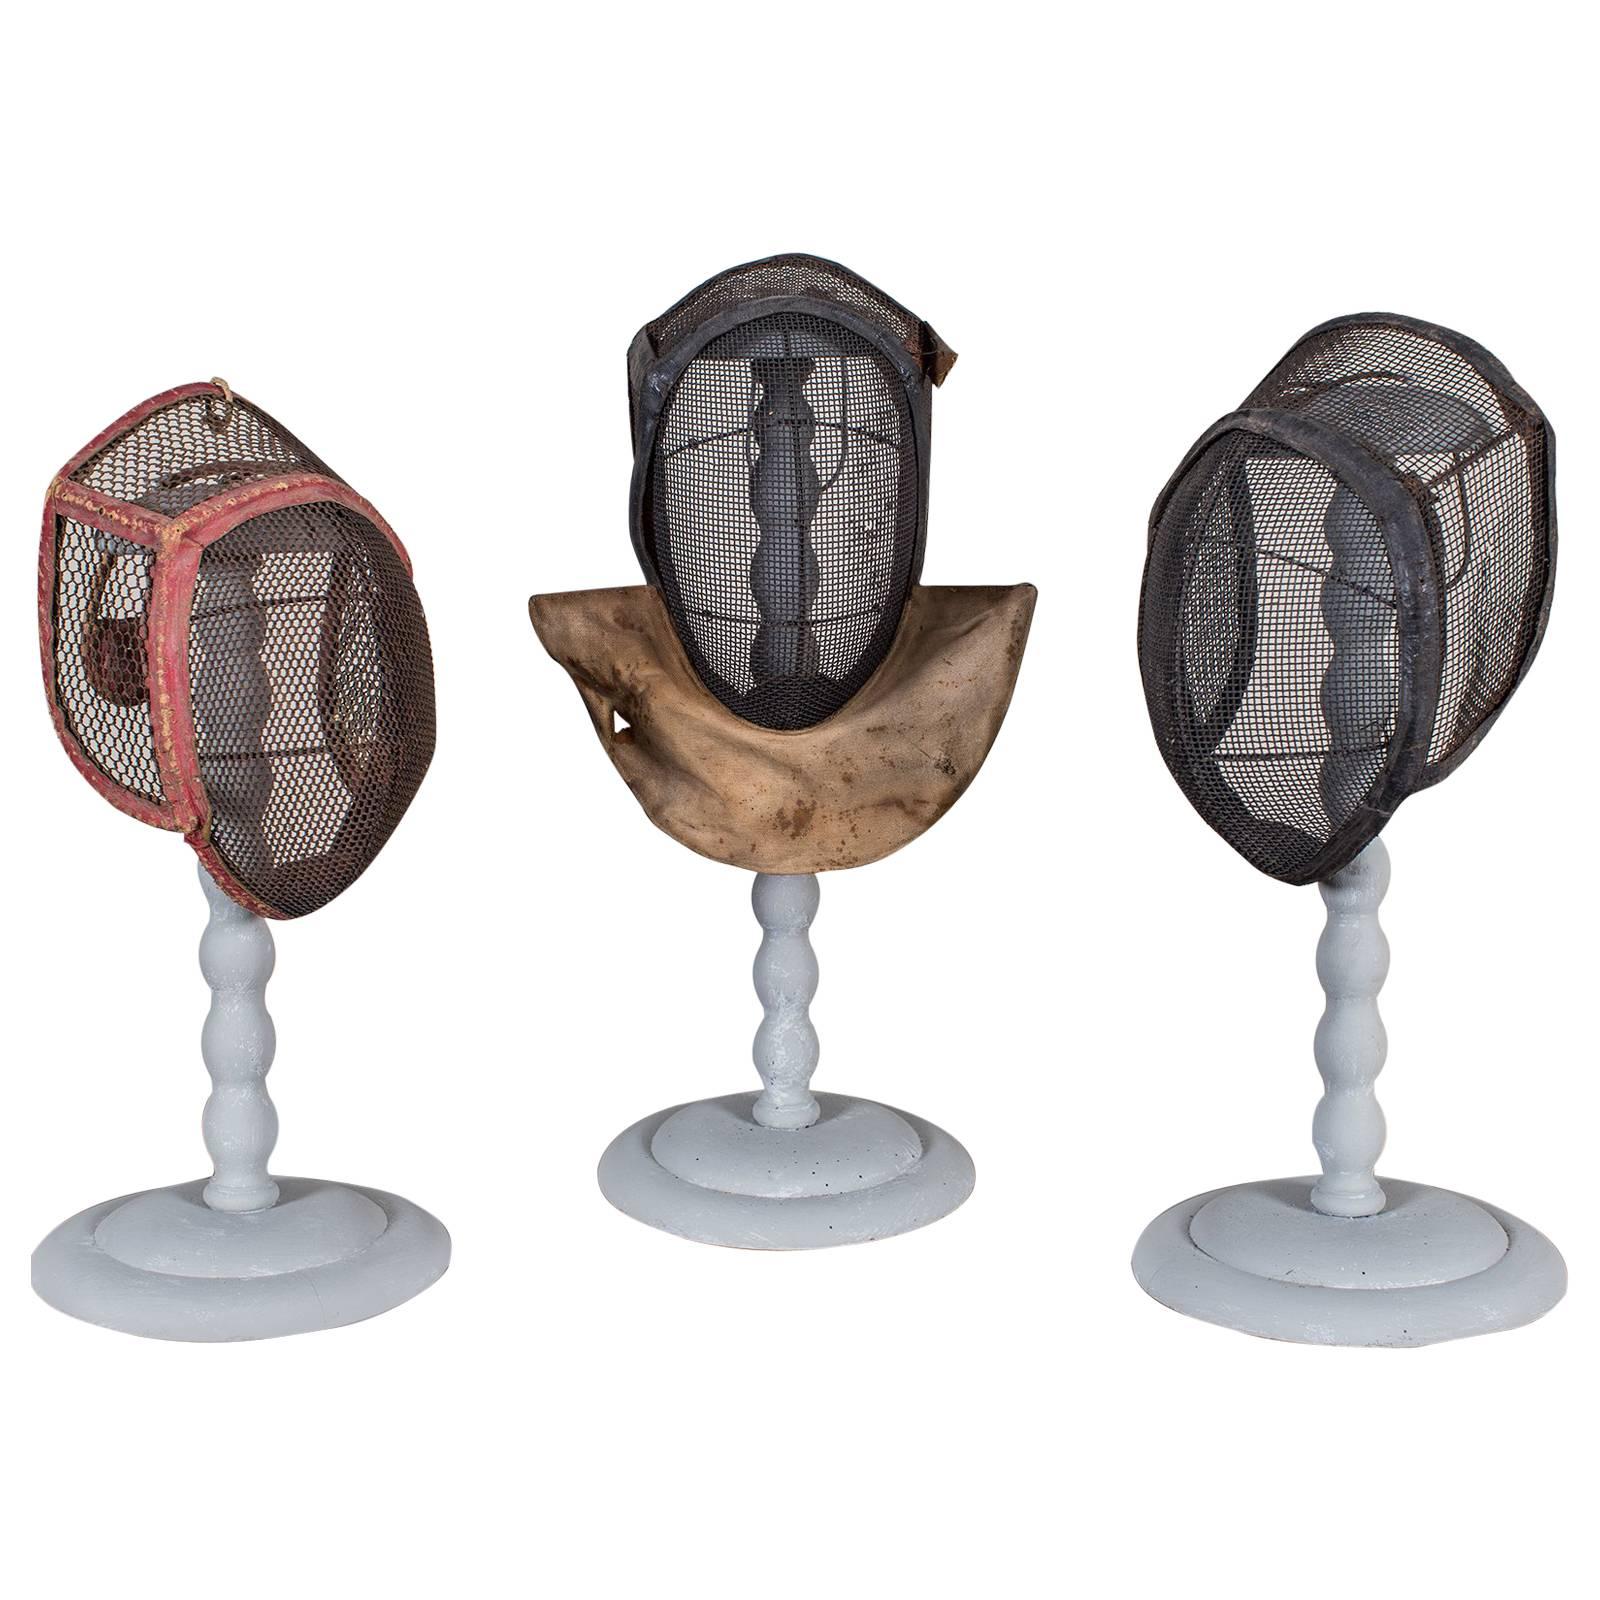 Set of Three Antique French Fencing Masks, circa 1910 Each on a Stand